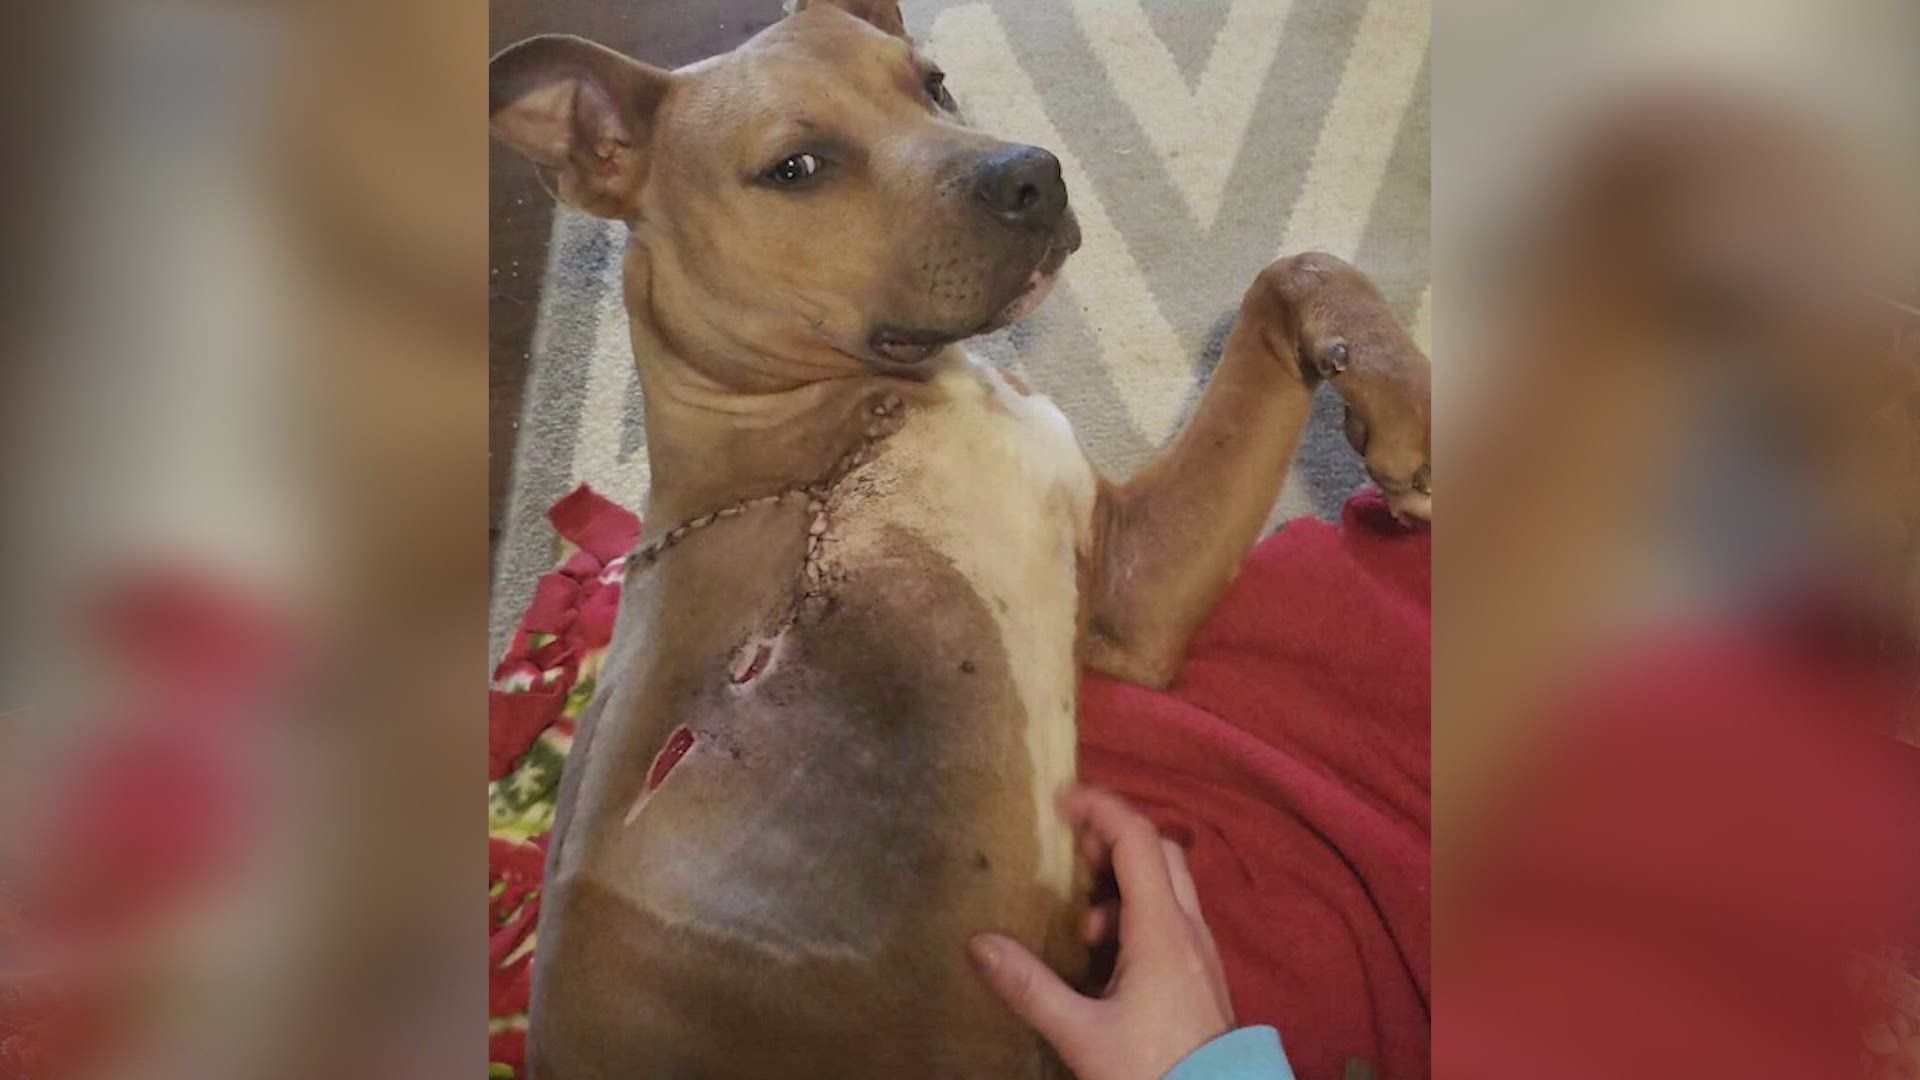 After being saved by a good Samaritan a dog begins his new life in San Angelo